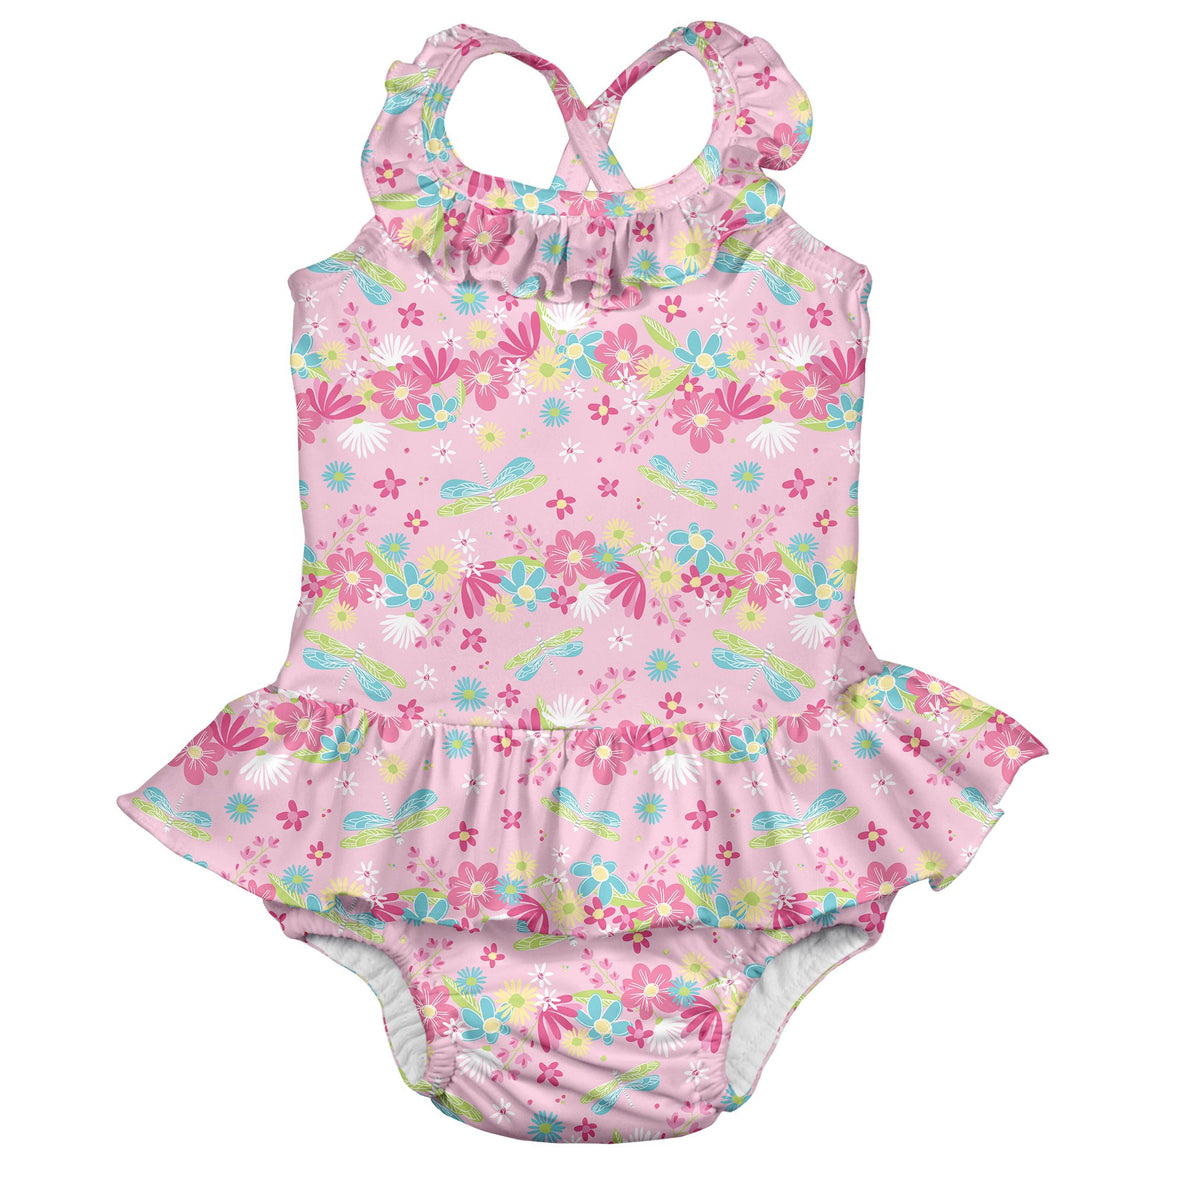 Ruffle Swimsuit with built in Swim Nappy - Pink Dragonfly